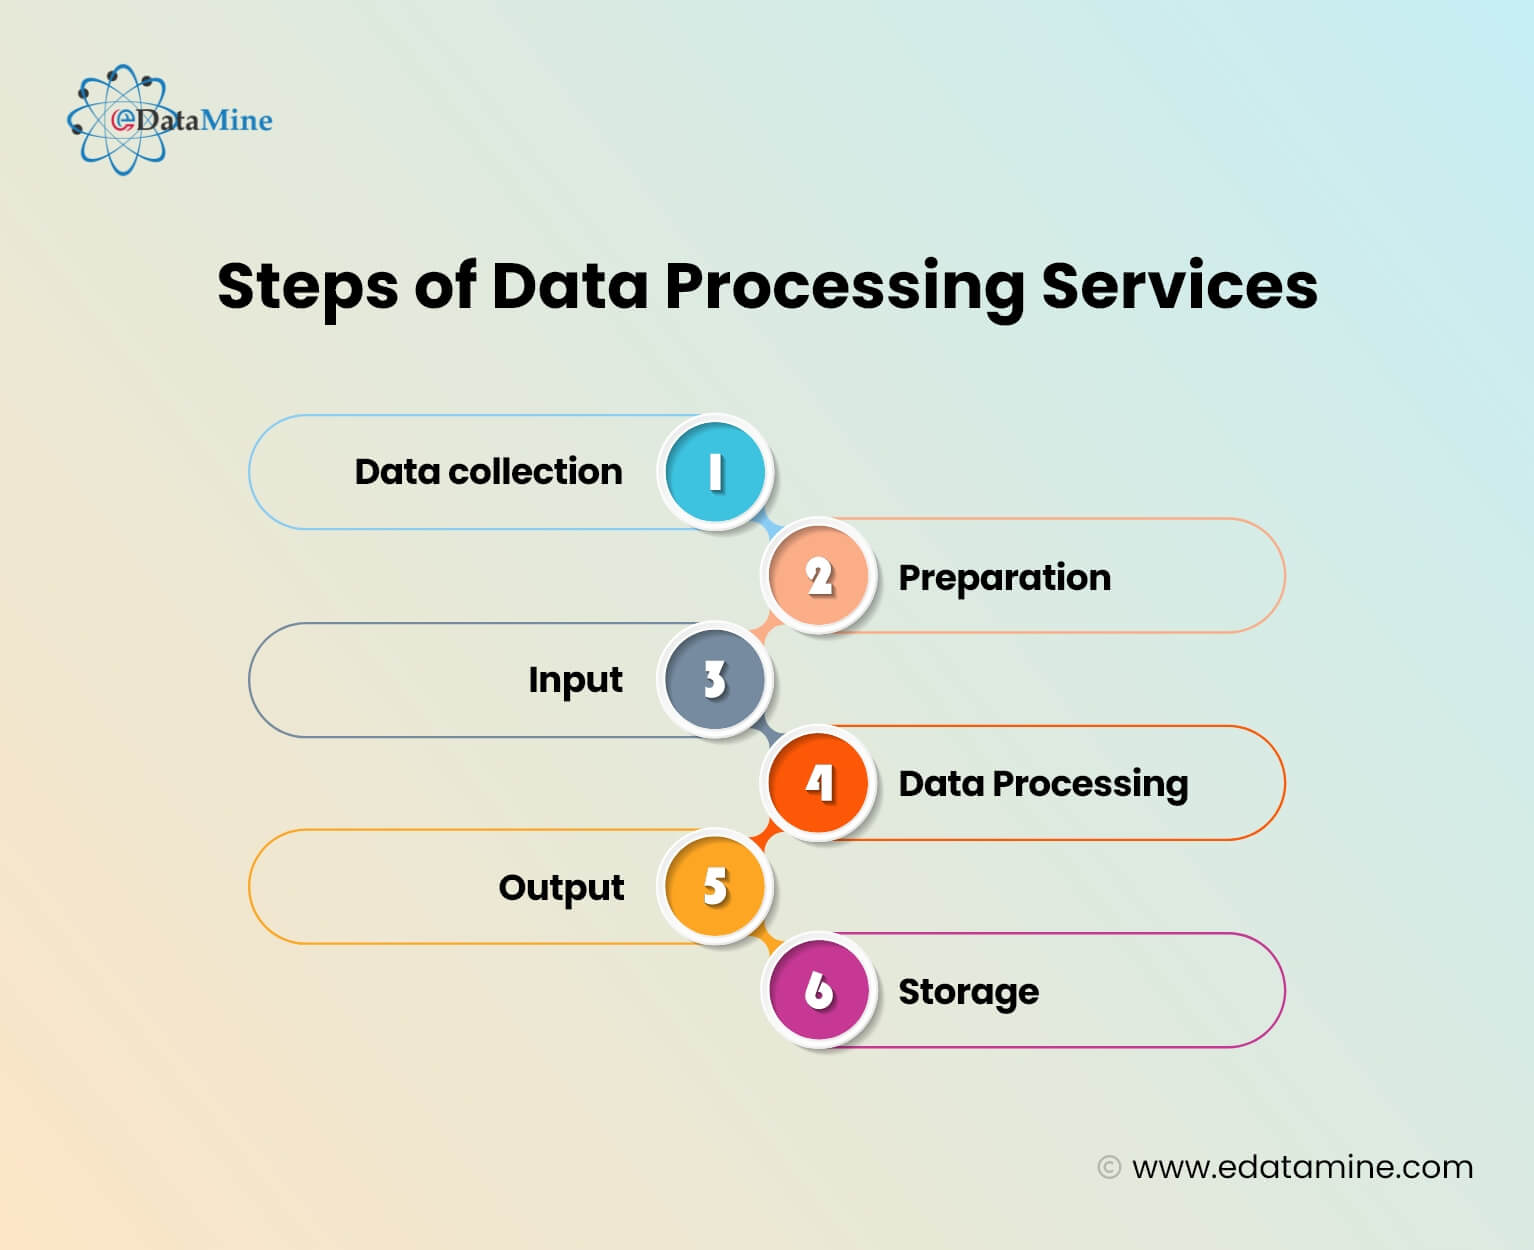 Steps of Data Processing Services